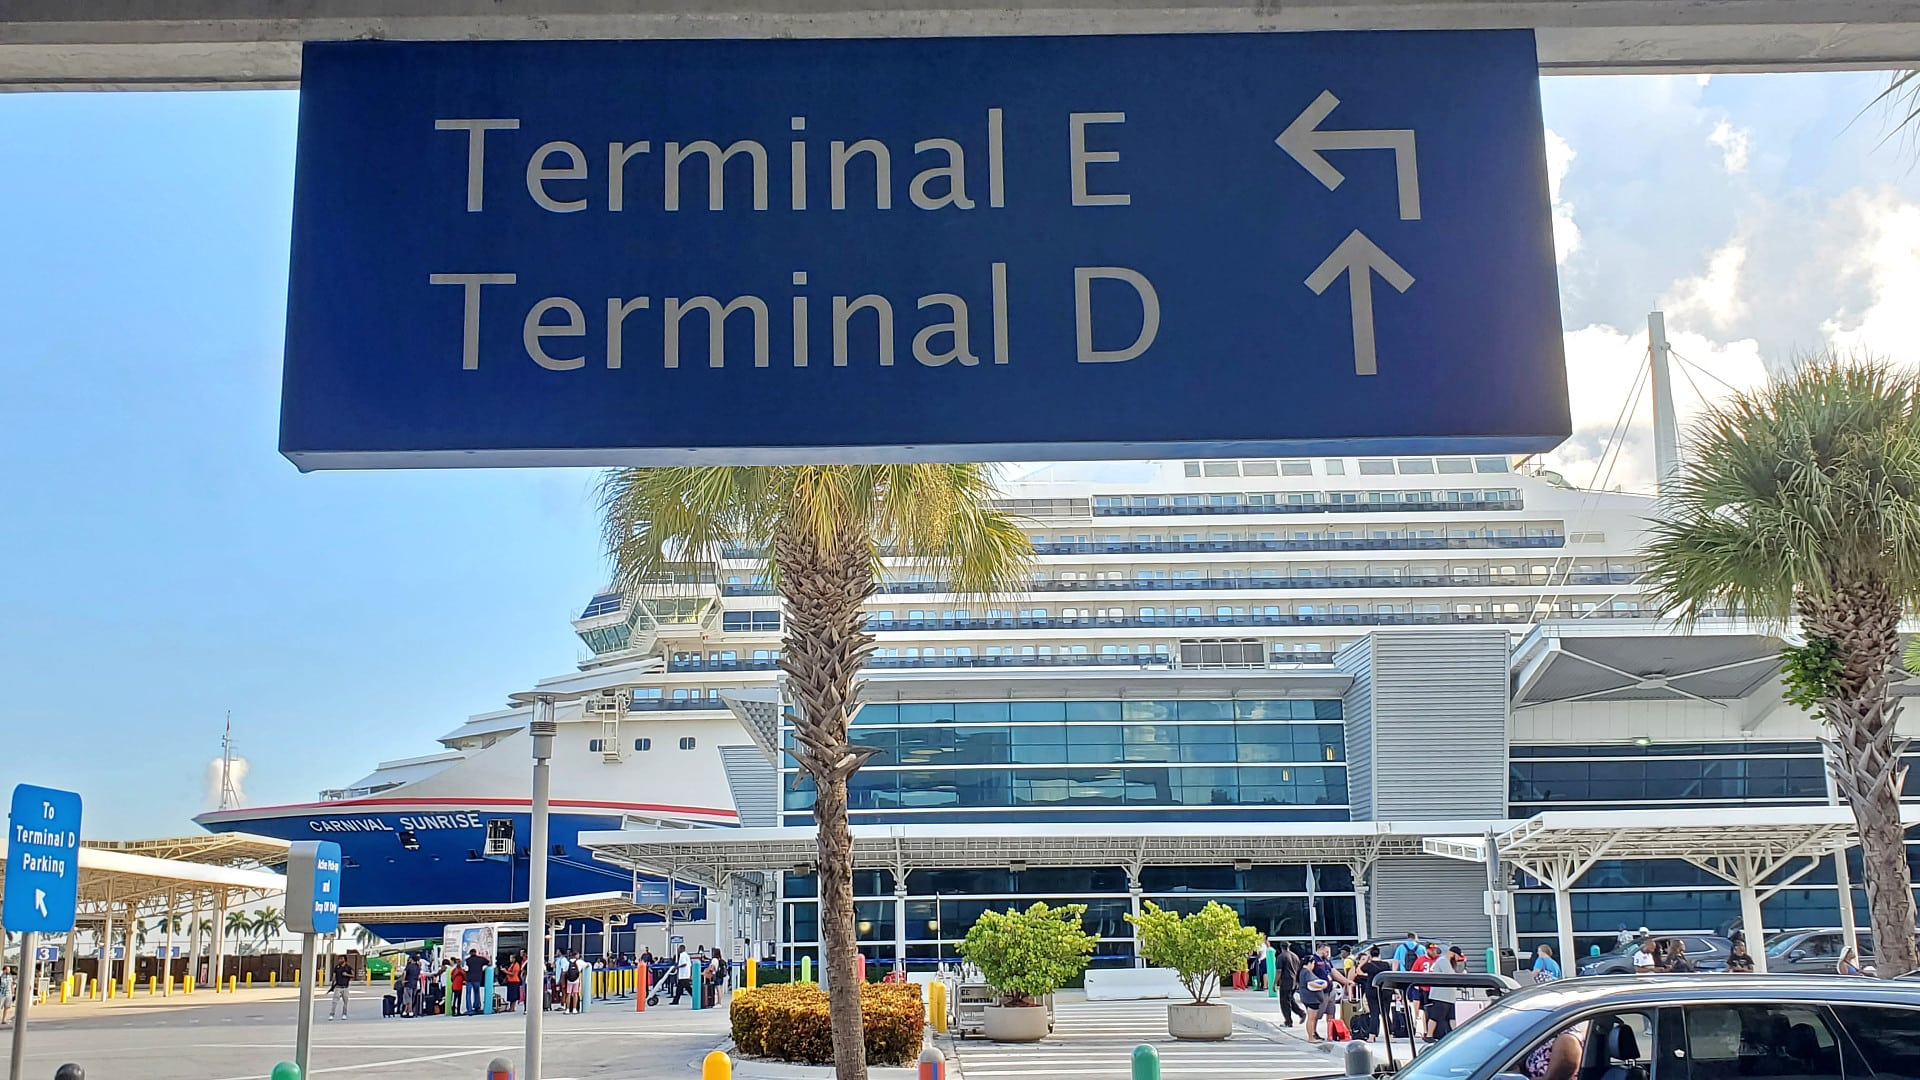 Terminal E and D on a sign in PortMiami in the parking garage